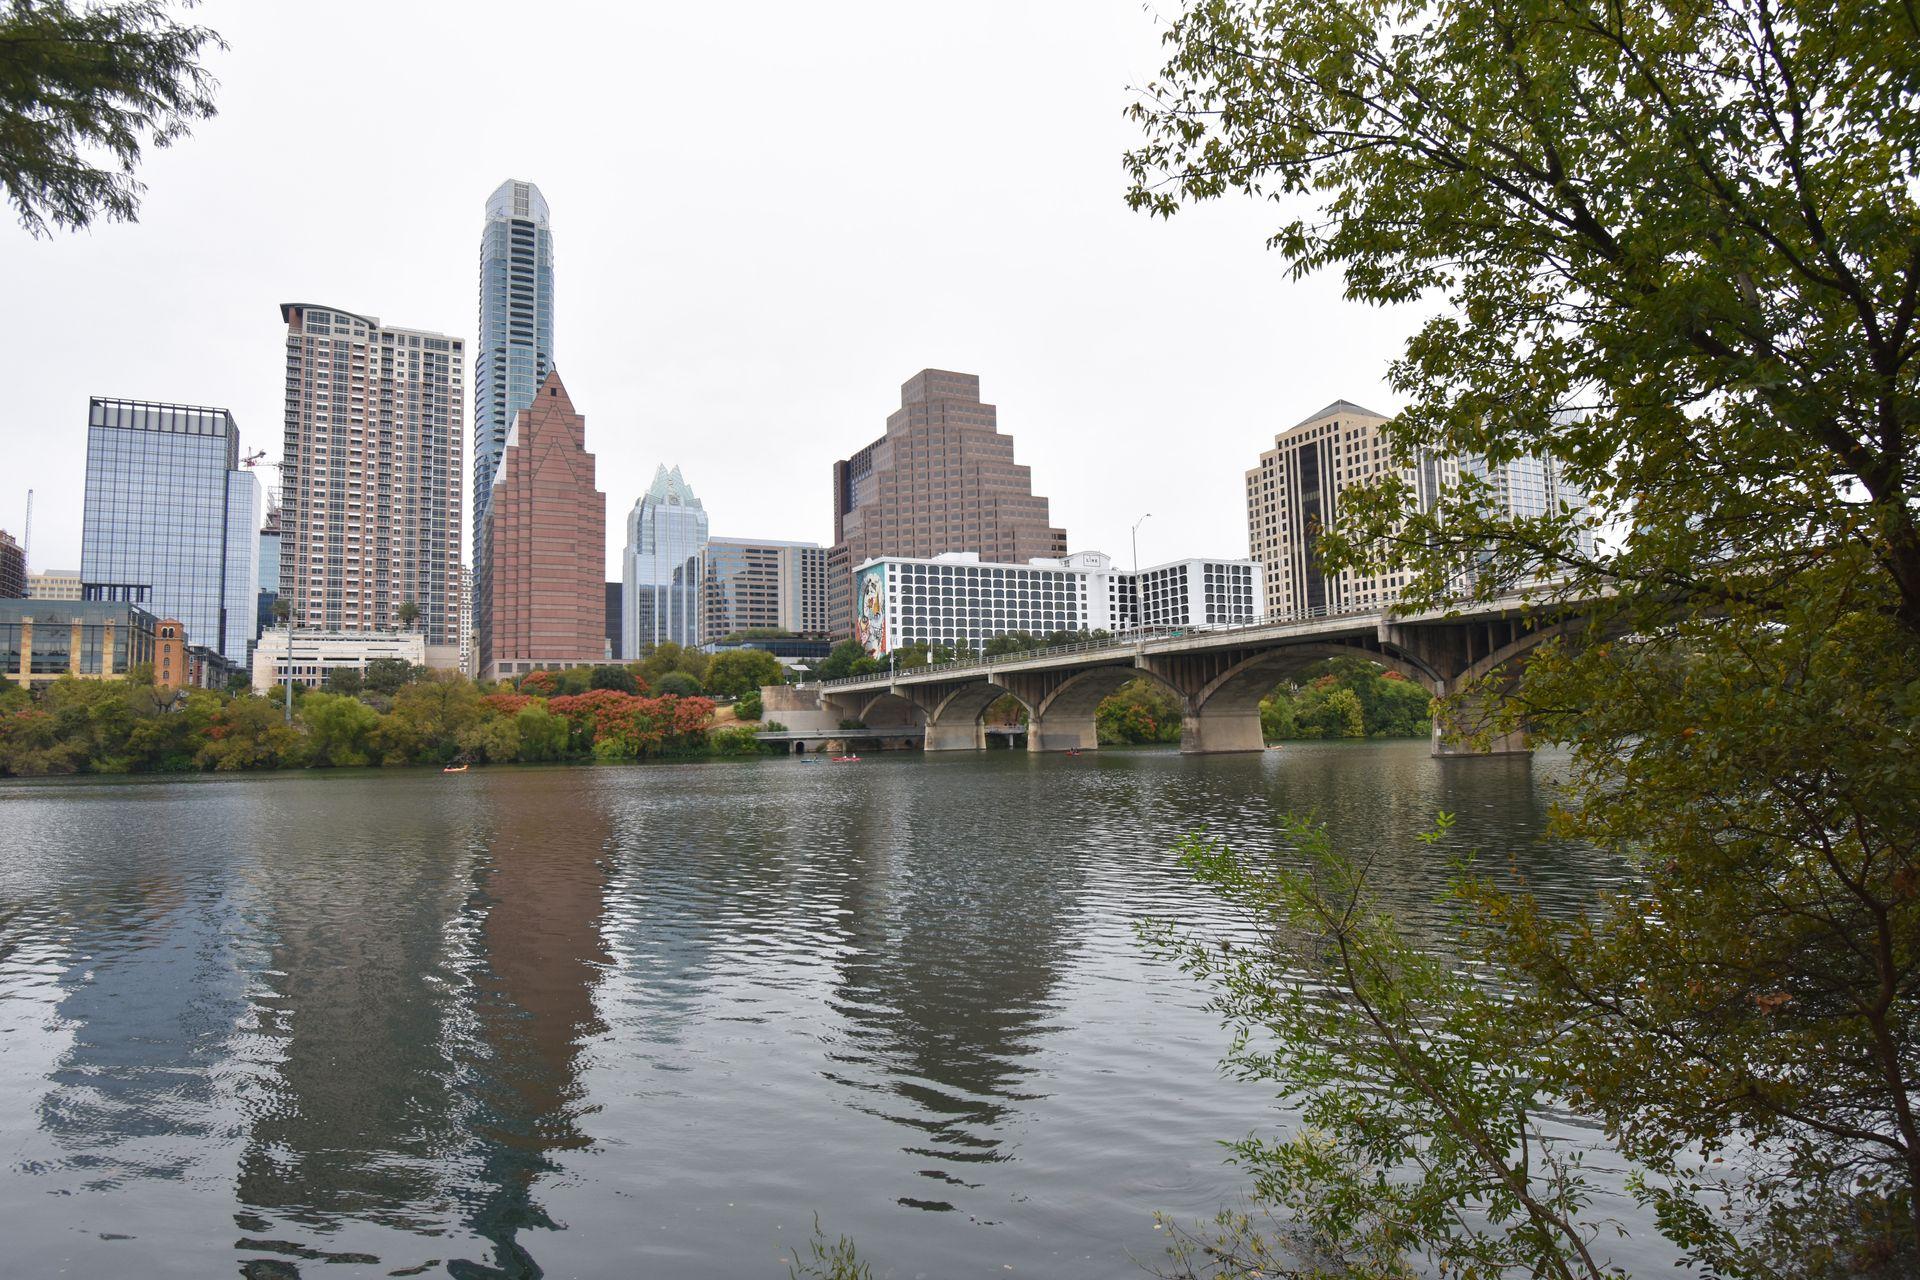 A view of downtown Austin from across Lady Bird Lake.